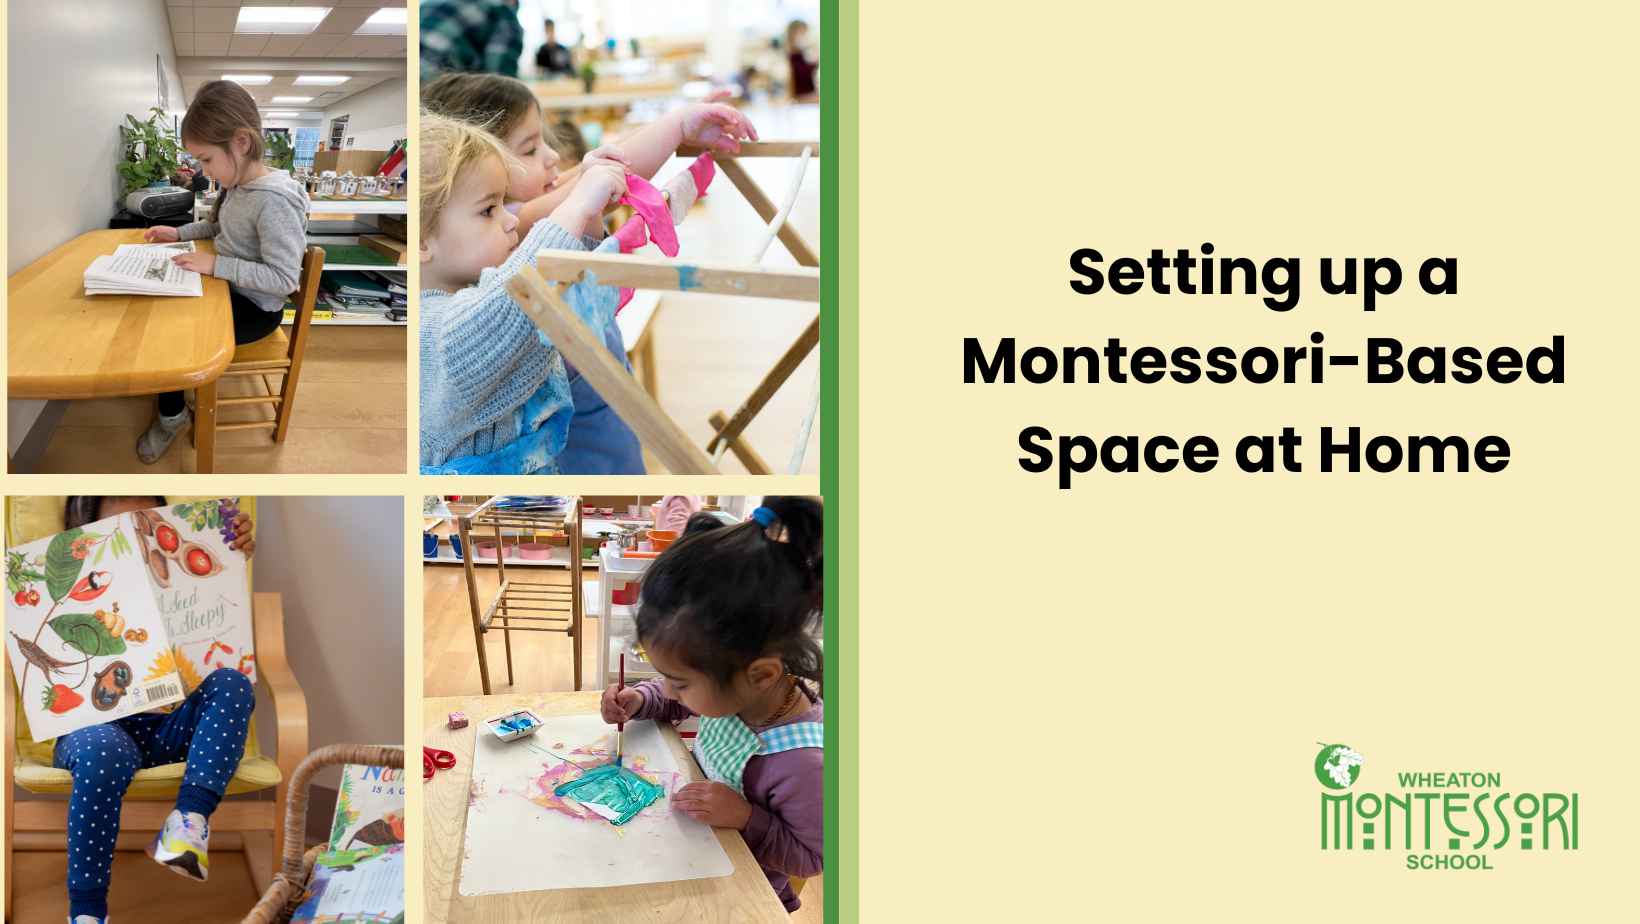 Setting up a Montessori-Based Space at Home